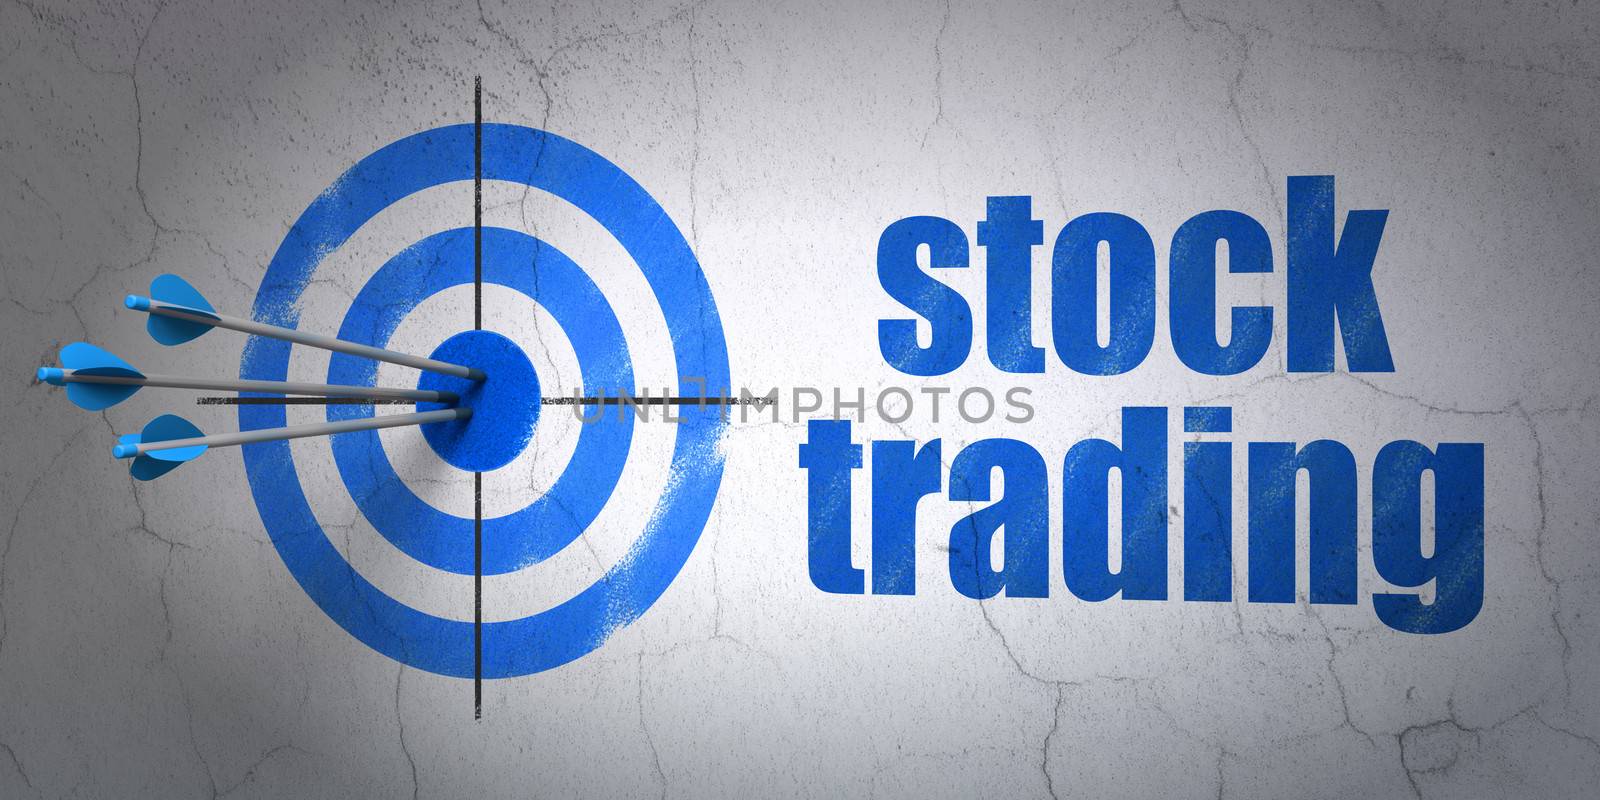 Success business concept: arrows hitting the center of target, Blue Stock Trading on wall background, 3d render